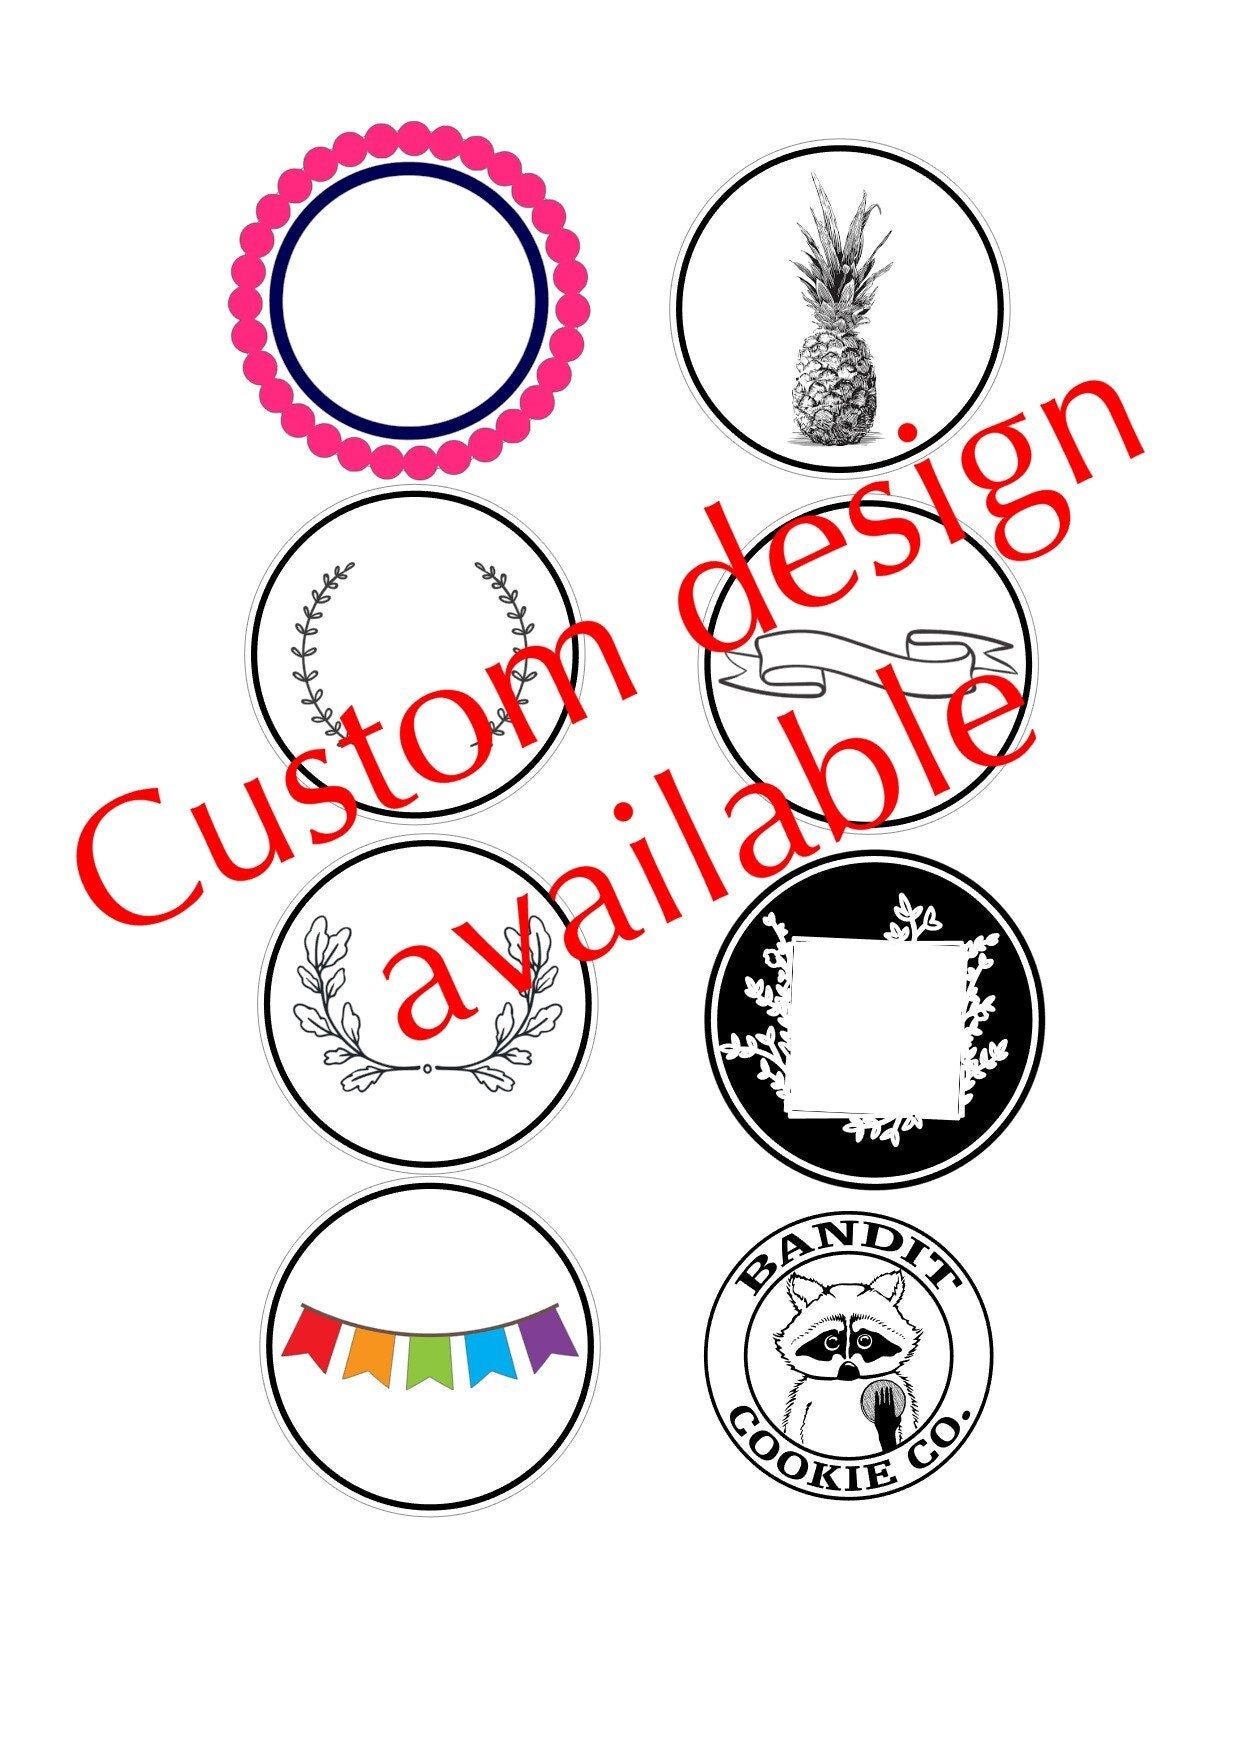 12 Custom Edible 2 DRINK Toppers, Circle Cocktail Topper, Edible Coffee  Image, Custom Edible Topper, Edible Photo, Custom Edible Image 